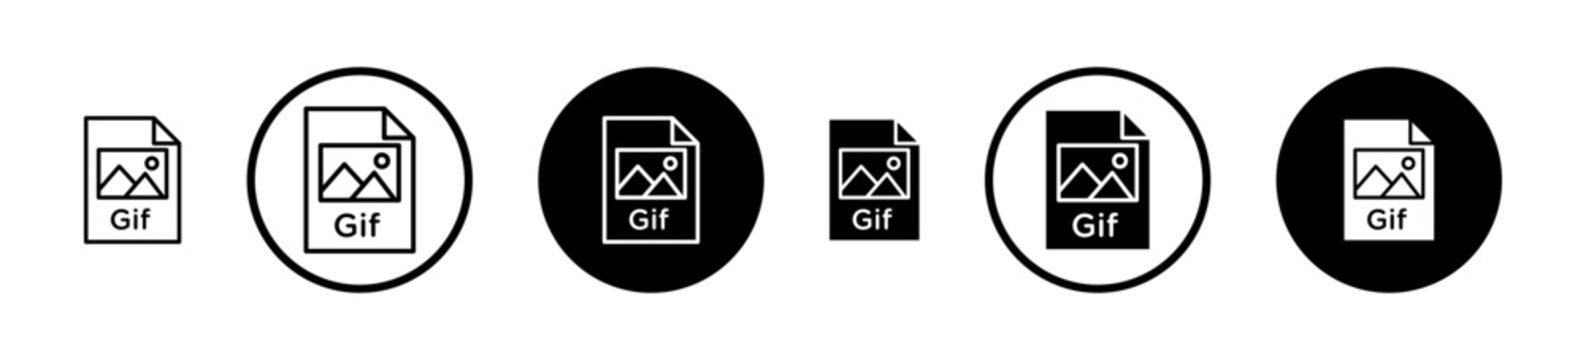 Gif icon set. animated gif format vector symbol. Gif extension file icon suitable for apps and websites UI designs.